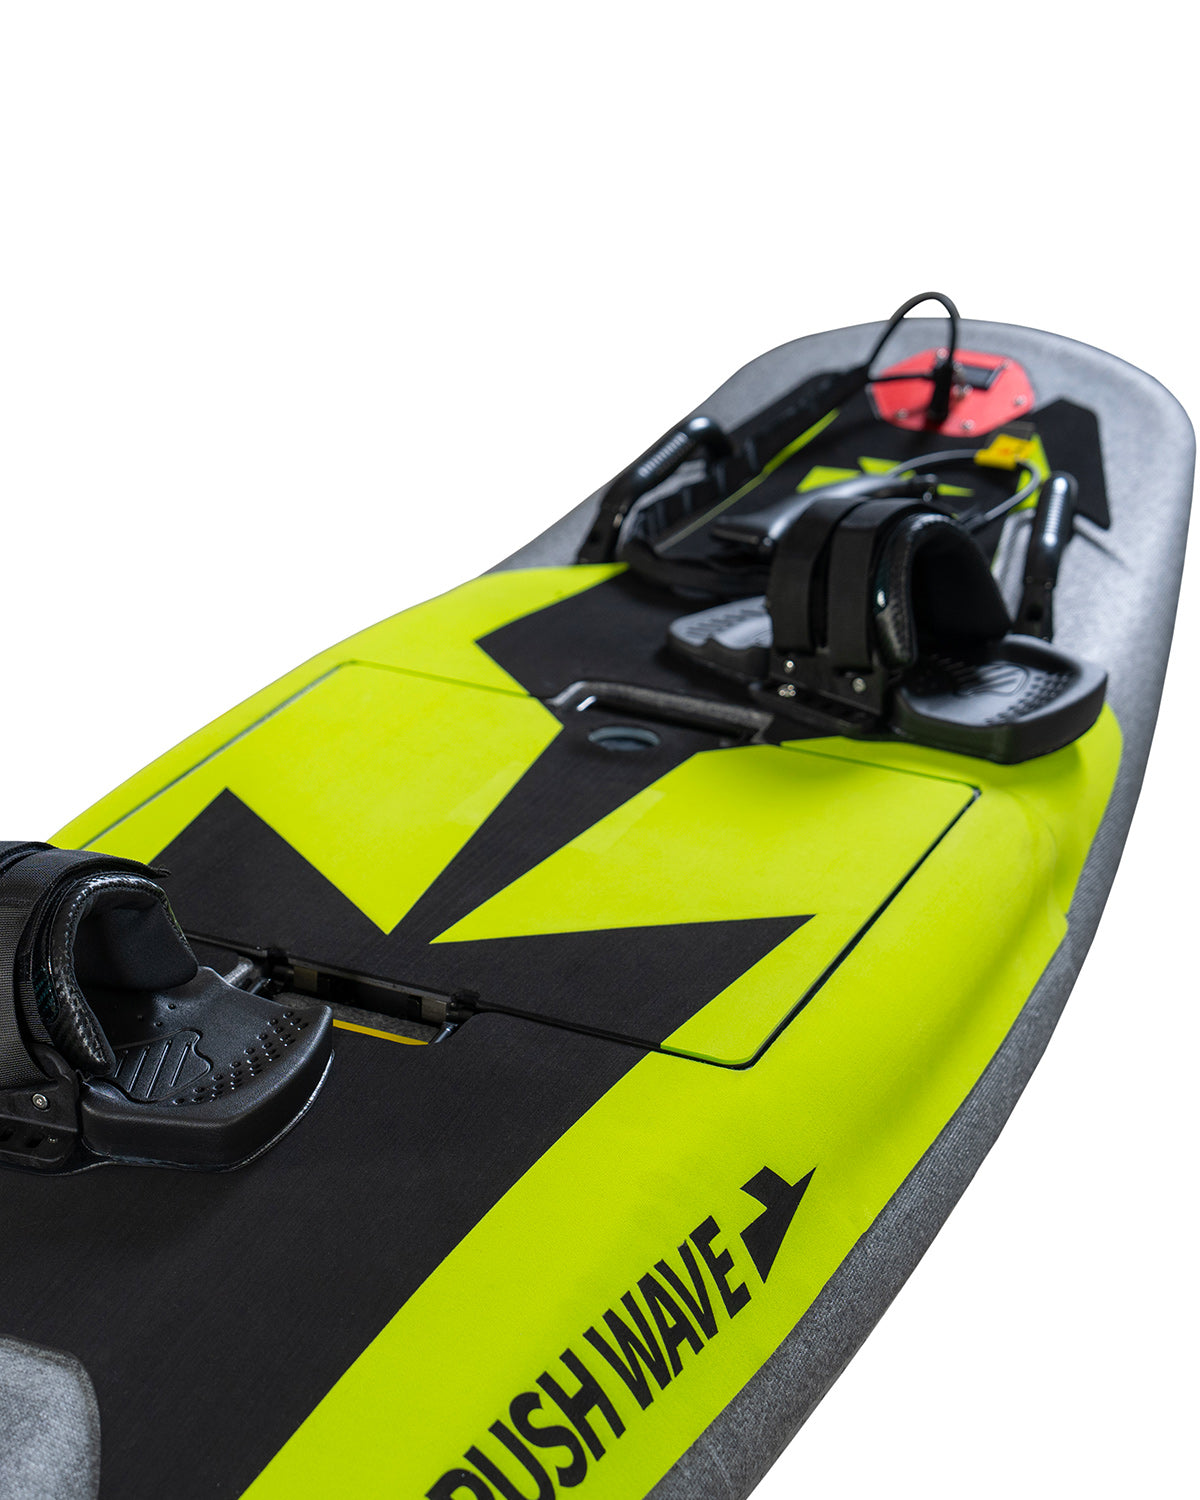 RUSH WAVE | Electric Surfboard | RIDER Pro 15KW | Best